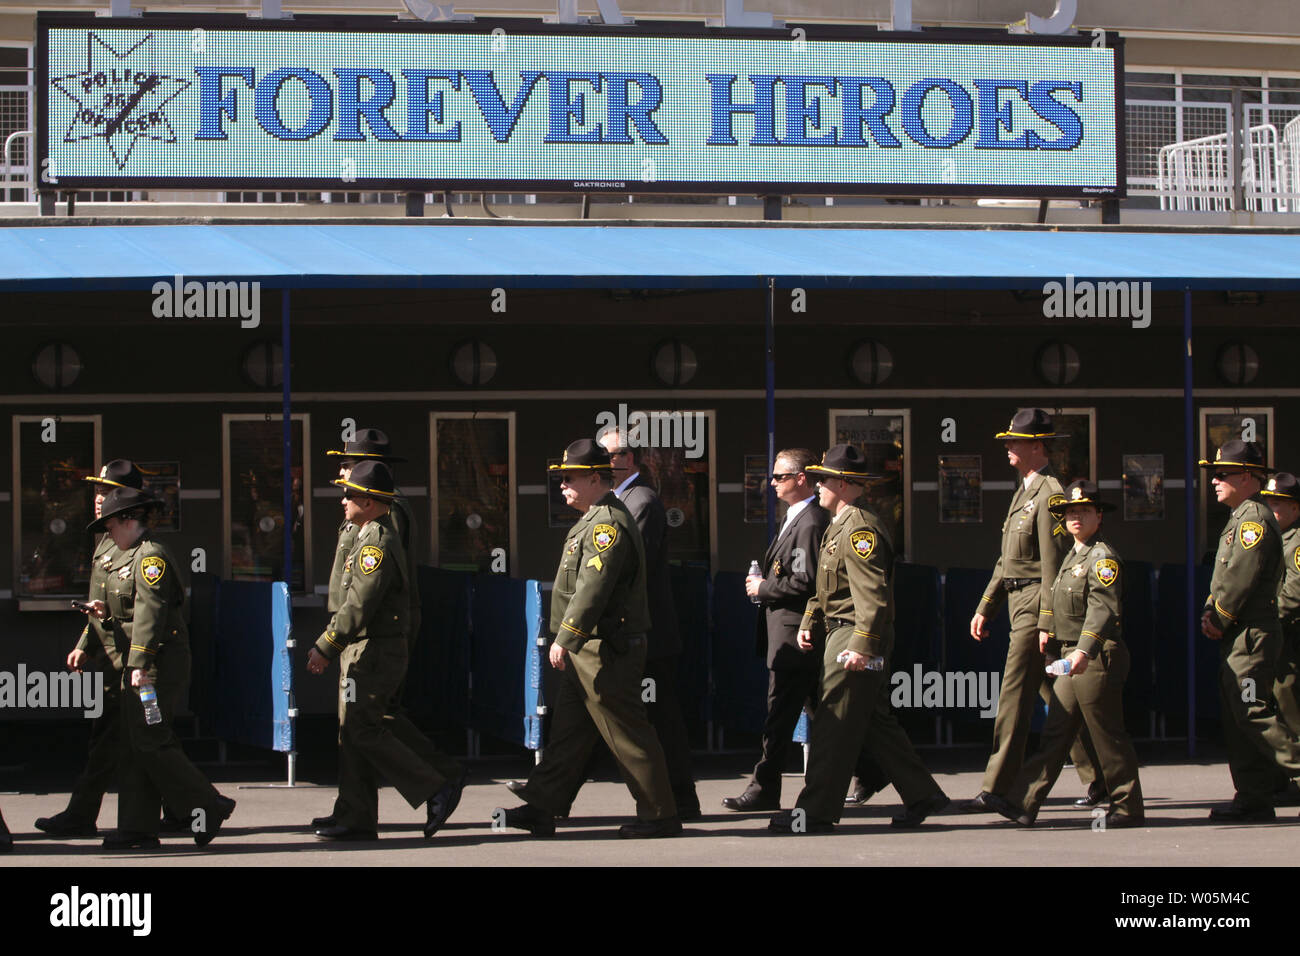 Members of the San Francisco Sheriff's Department walk by a sign honoring the four Oakland Police officers, in Oakland, California on Friday, March 27, 2009. Thousands of police officers gathered for the funeral of the Oakland Police officers who were fatally shot in the line of duty. (UPI Photo/Bob Larson) Stock Photo